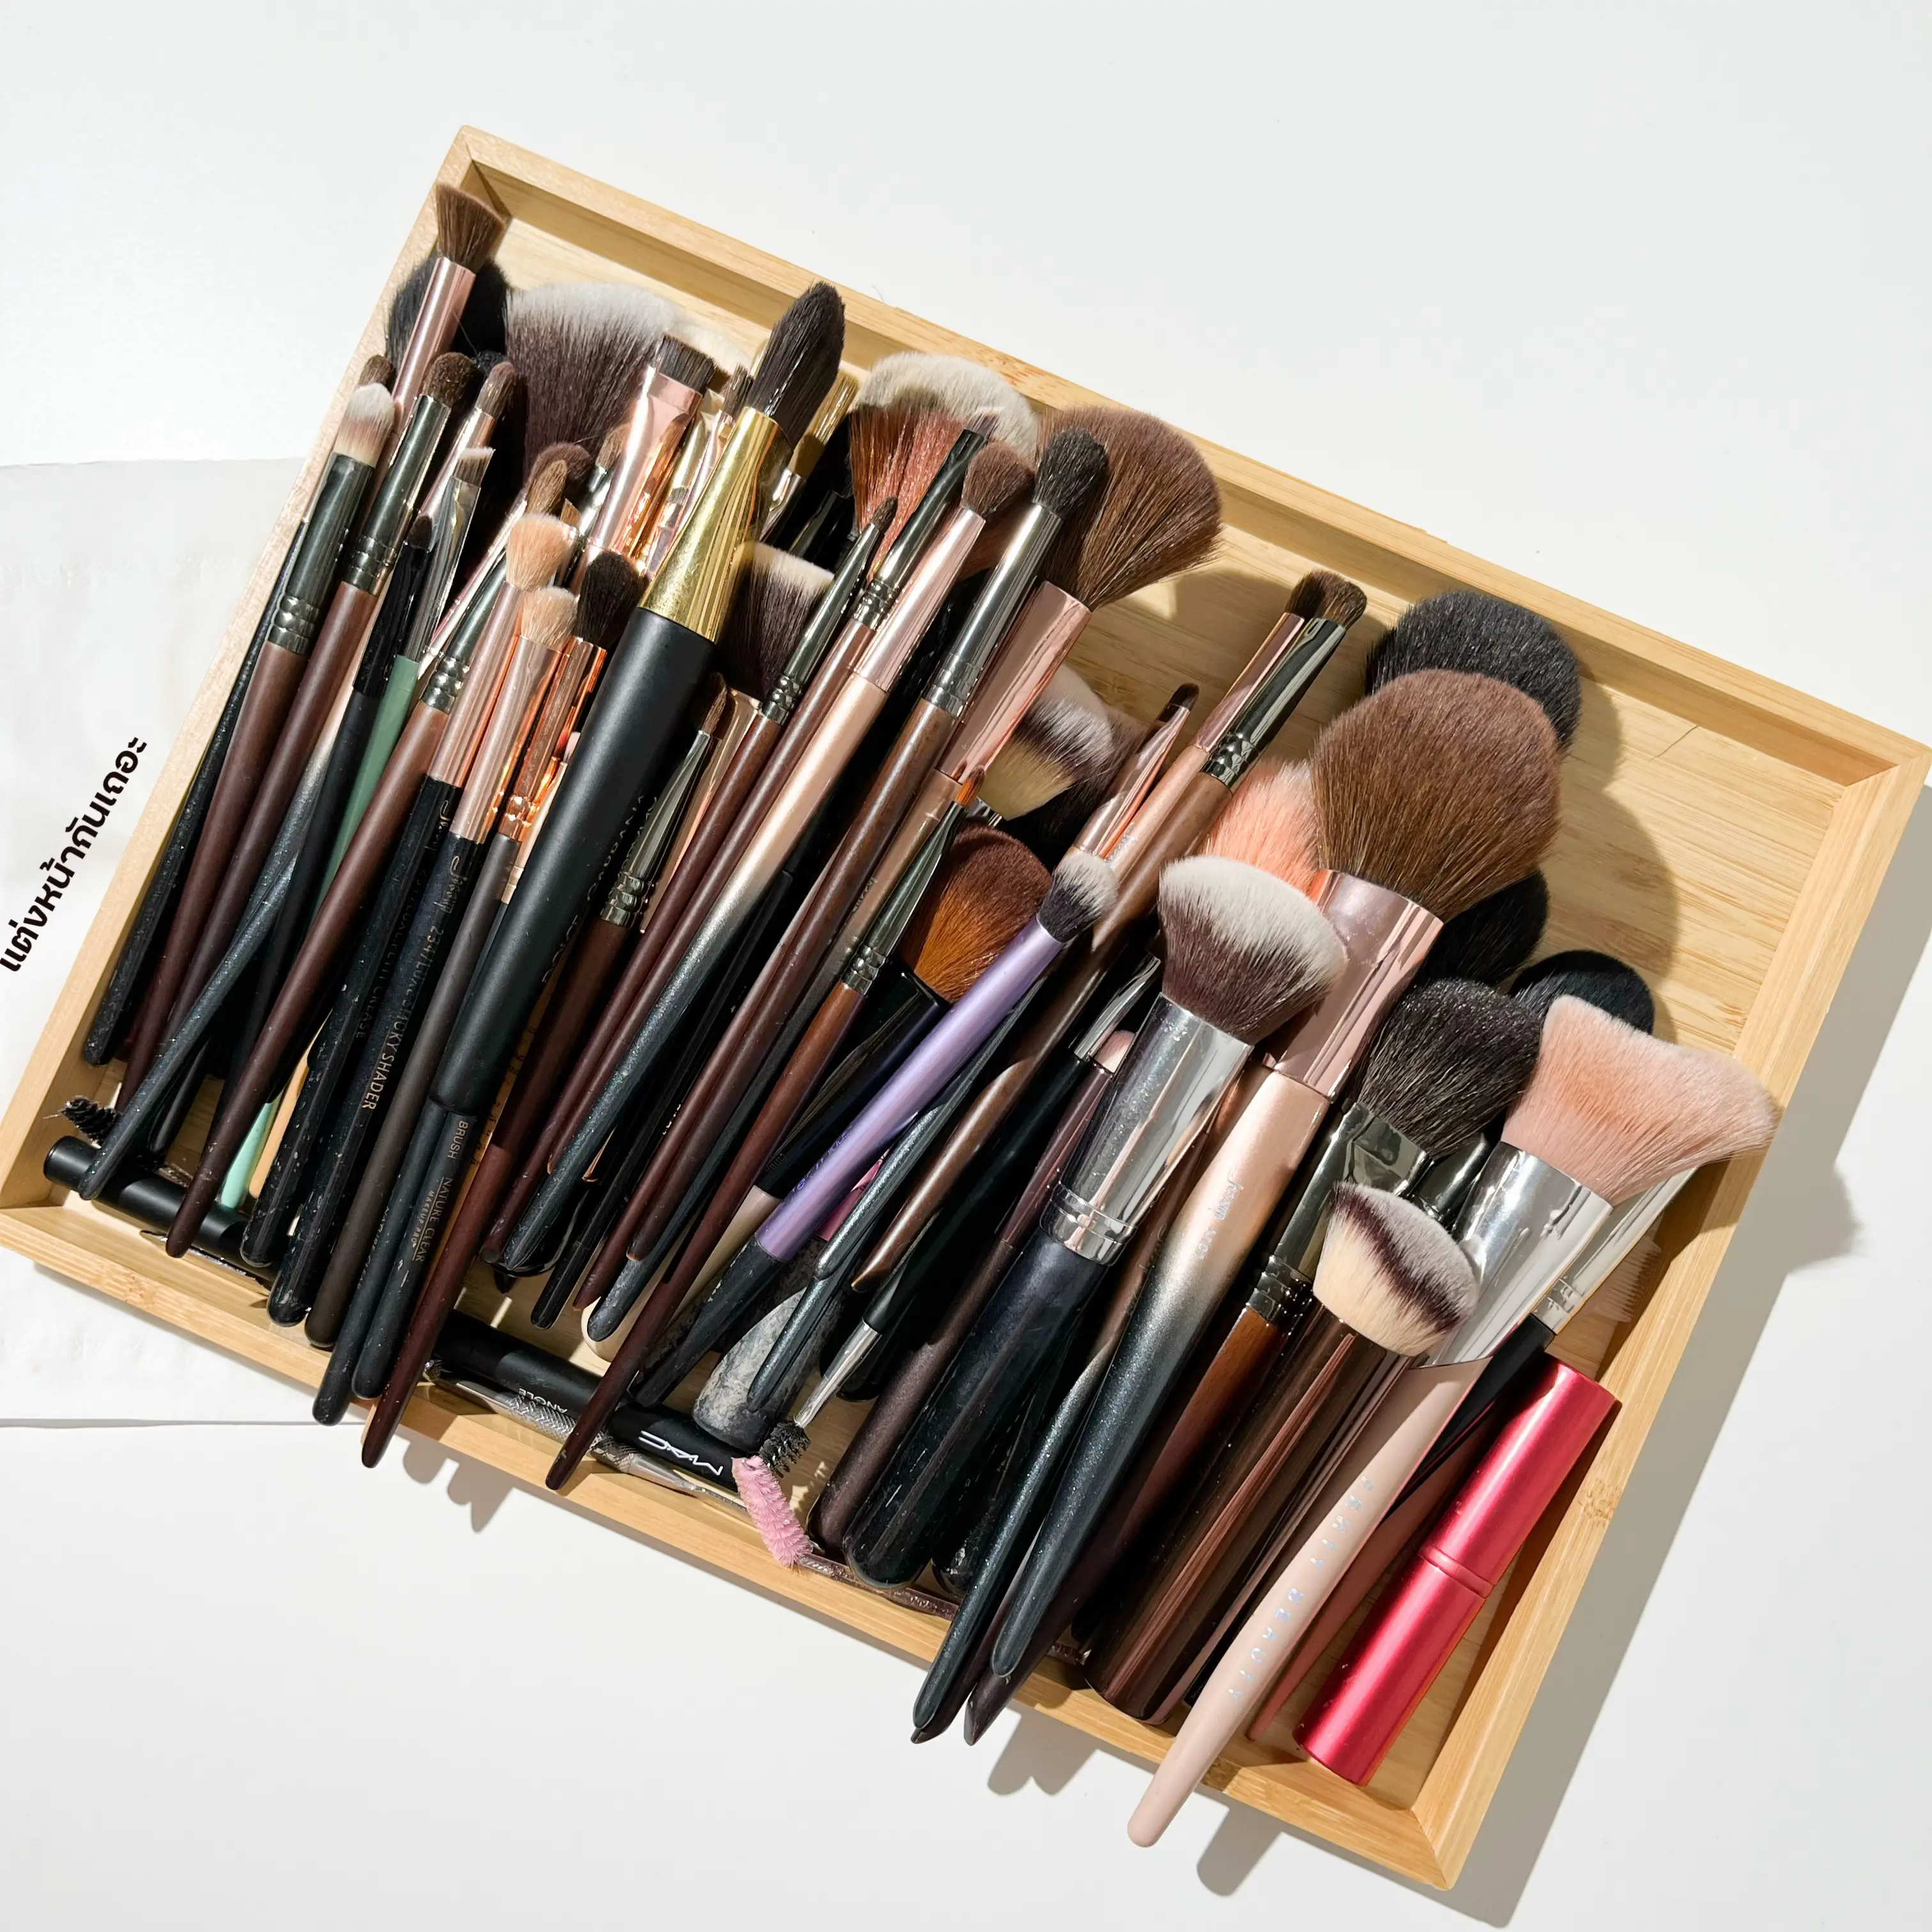 Wash 100 Makeup Brushes Within 1 Hour